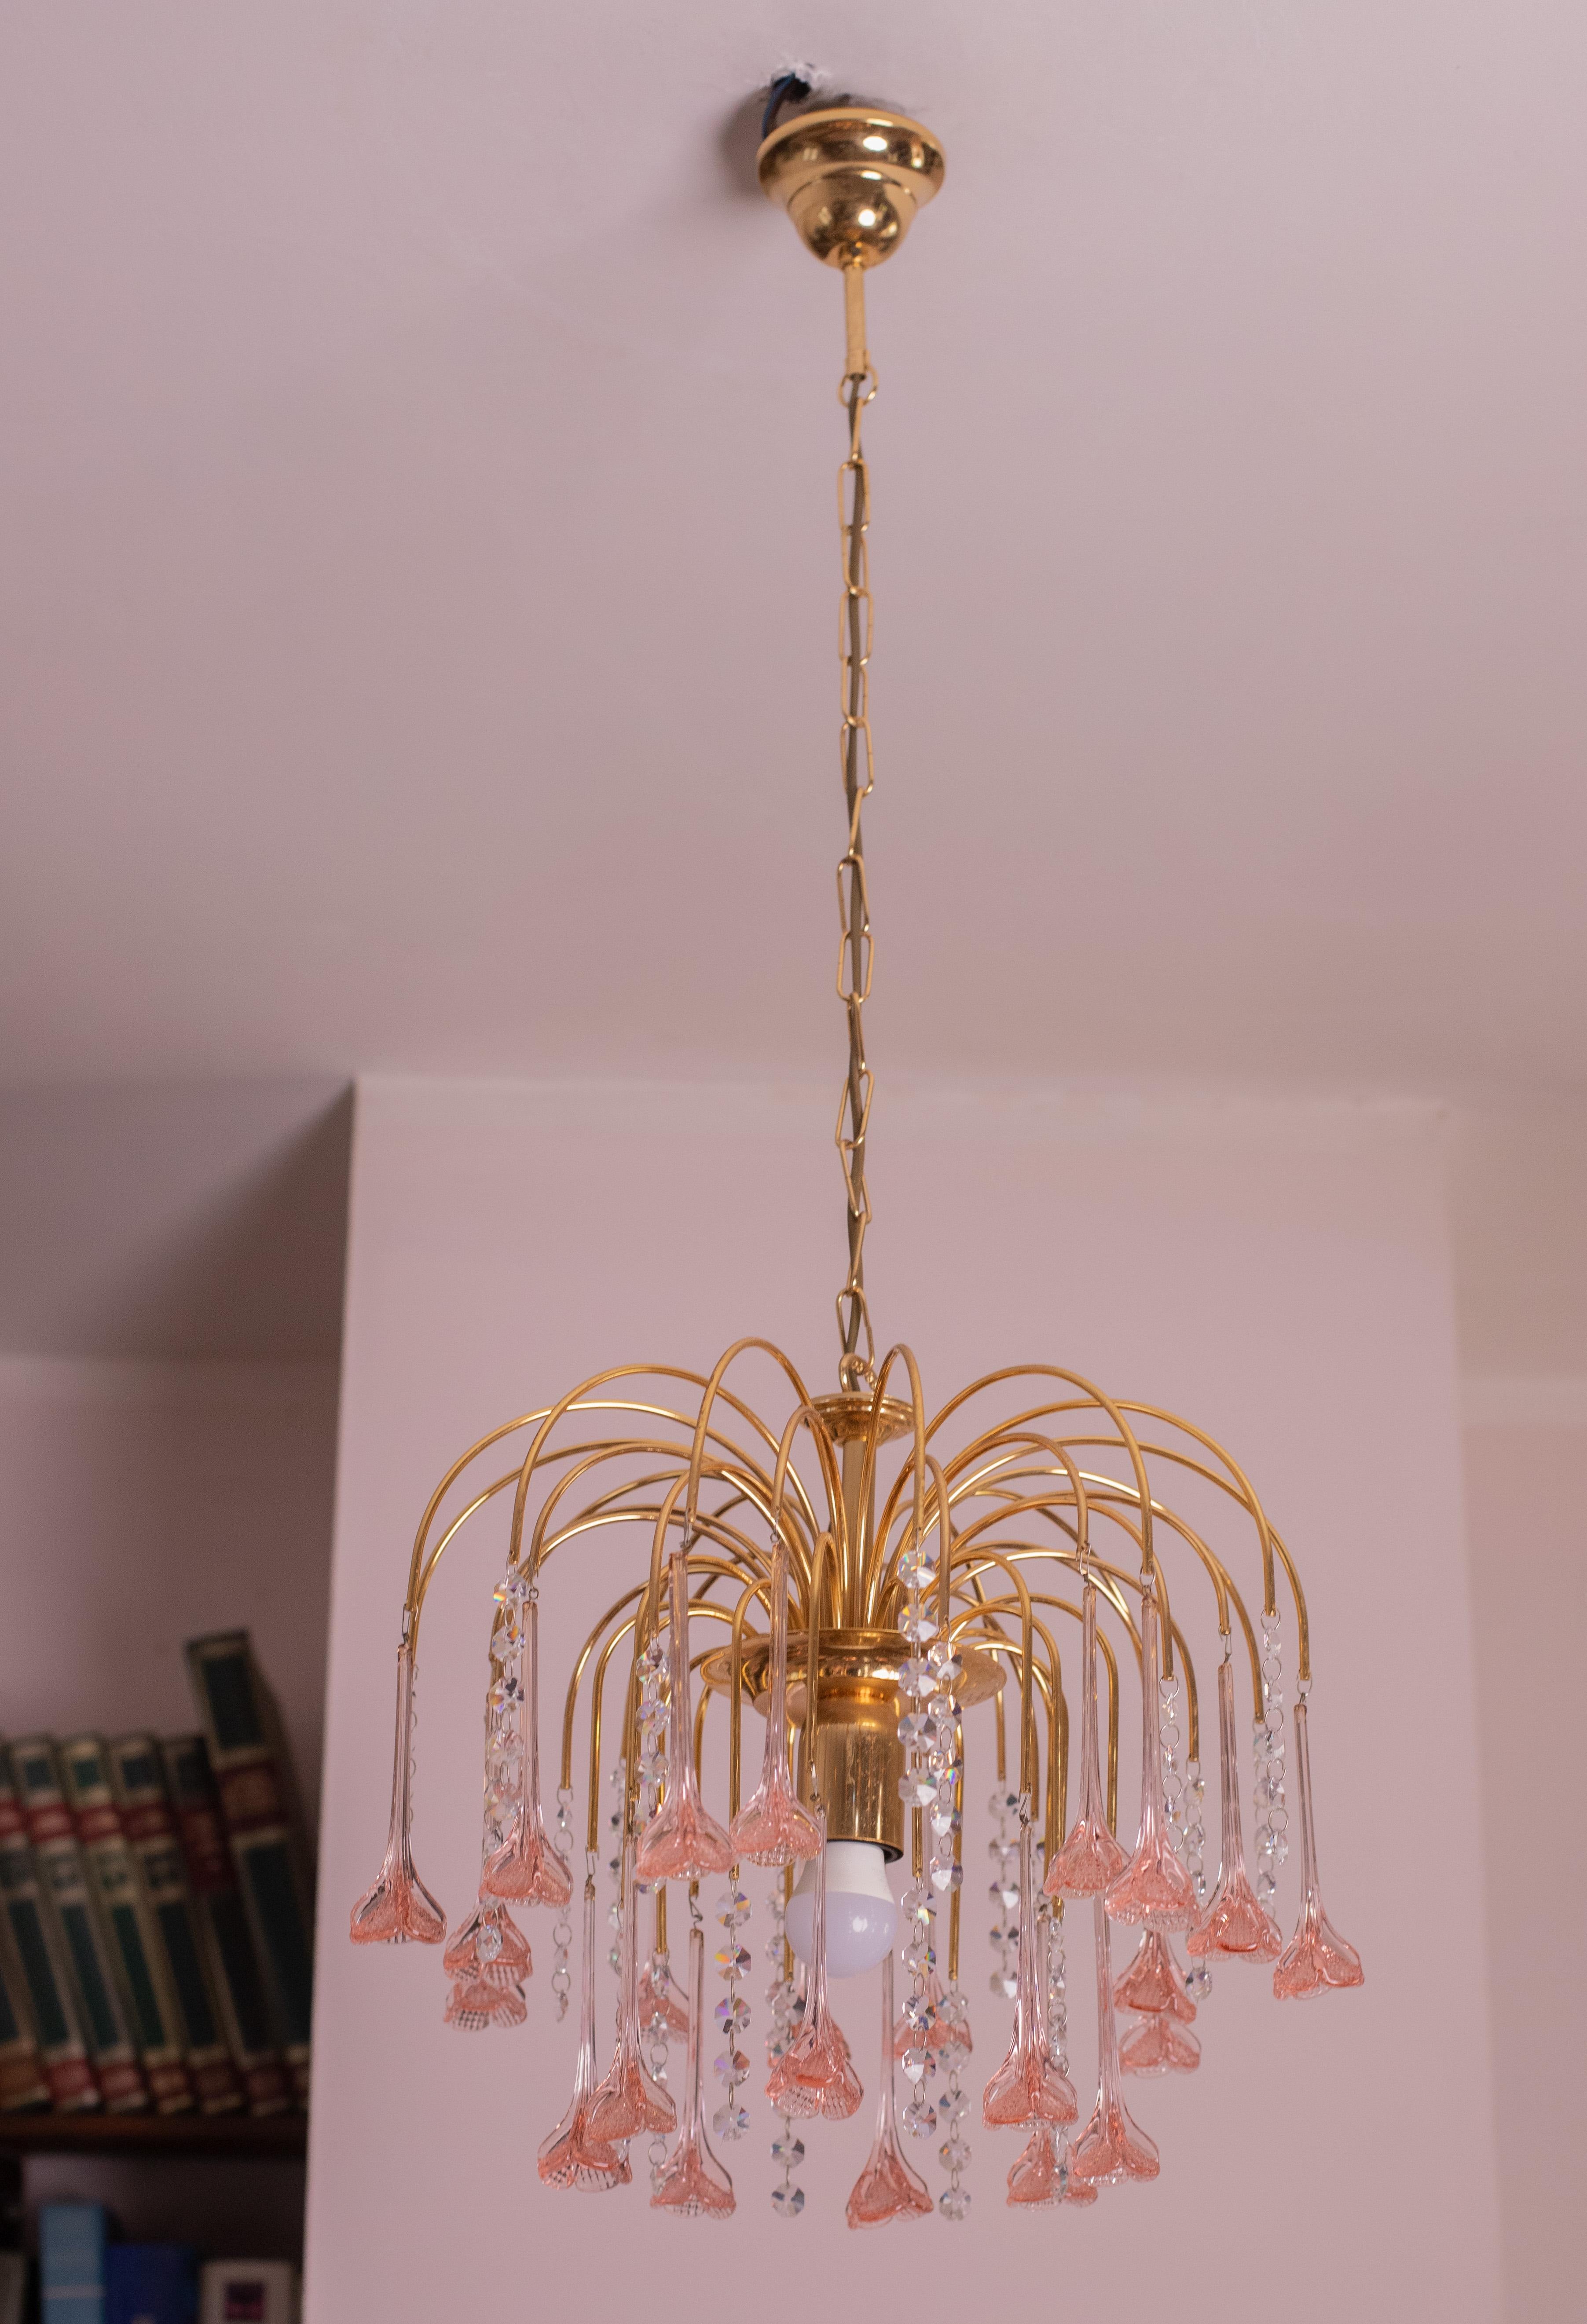 Murano chandelier with pink flowers in Hollywood Regency style. This beautiful luxury Murano glass chandelier is a design in the style of Paolo Venini. With its romantic glass flowers, it is truly a joy to behold. The chandelier consists of three